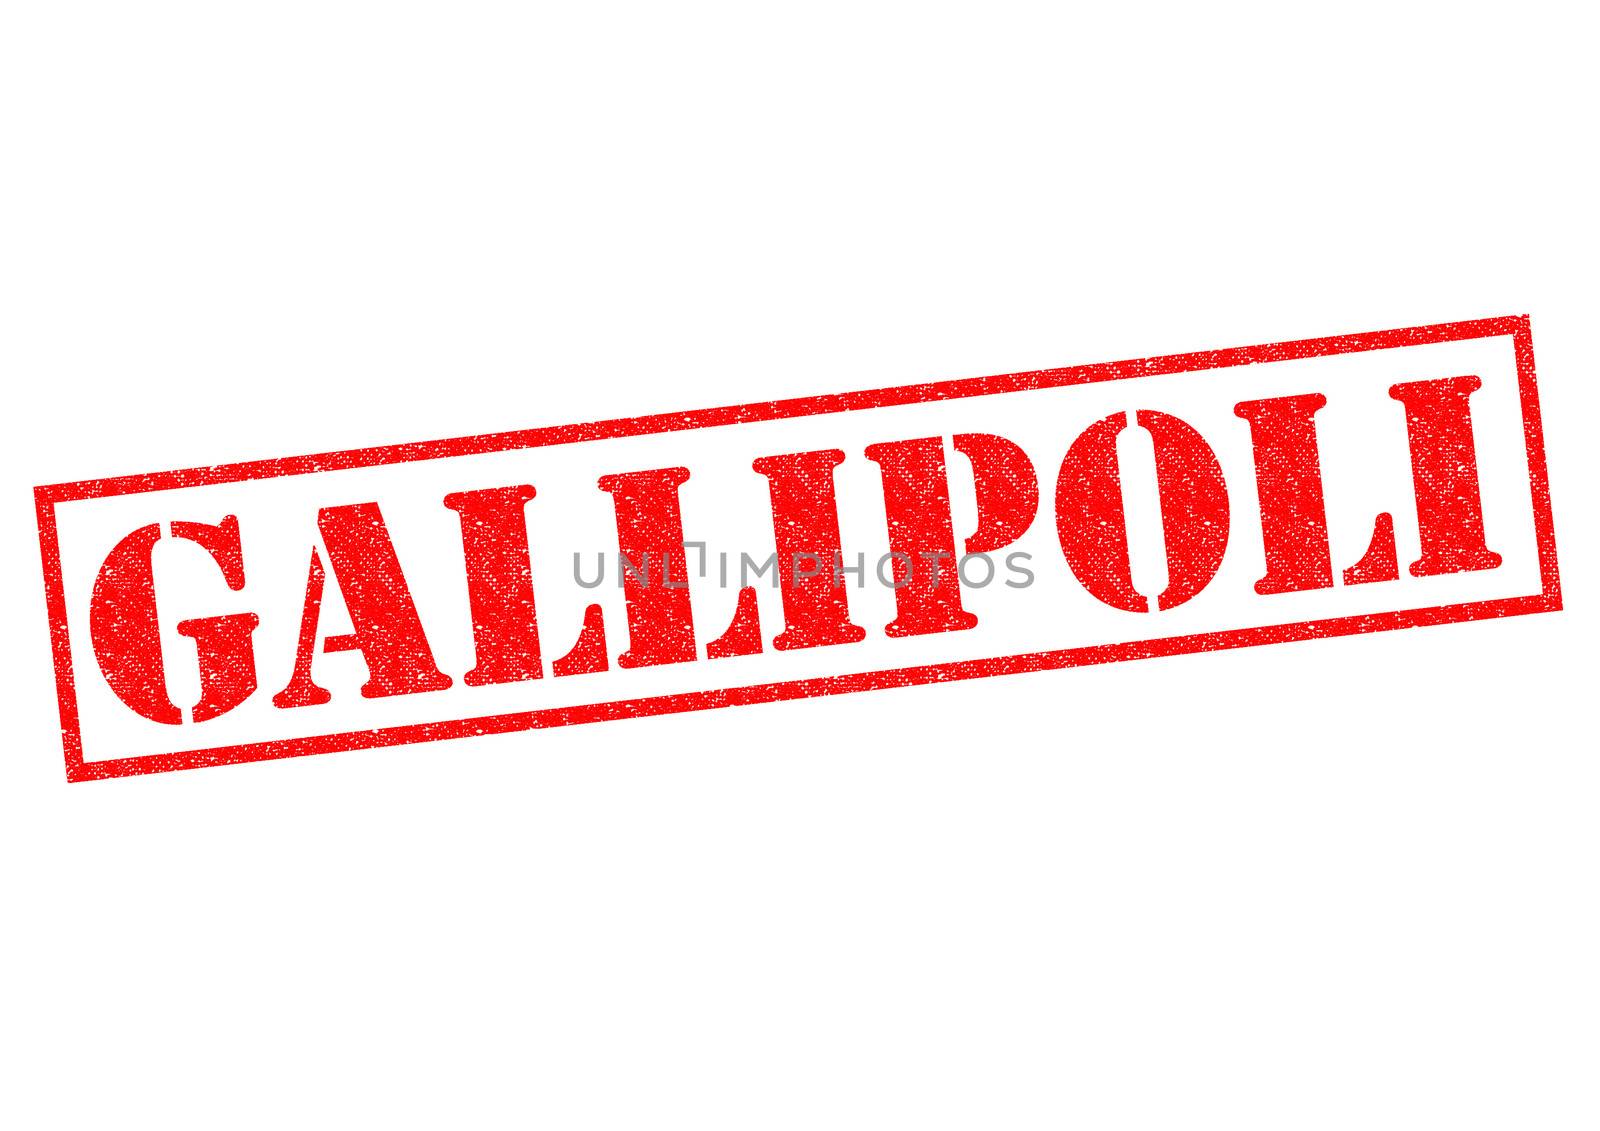 GALLIPOLI red Rubber Stamp over a white background.